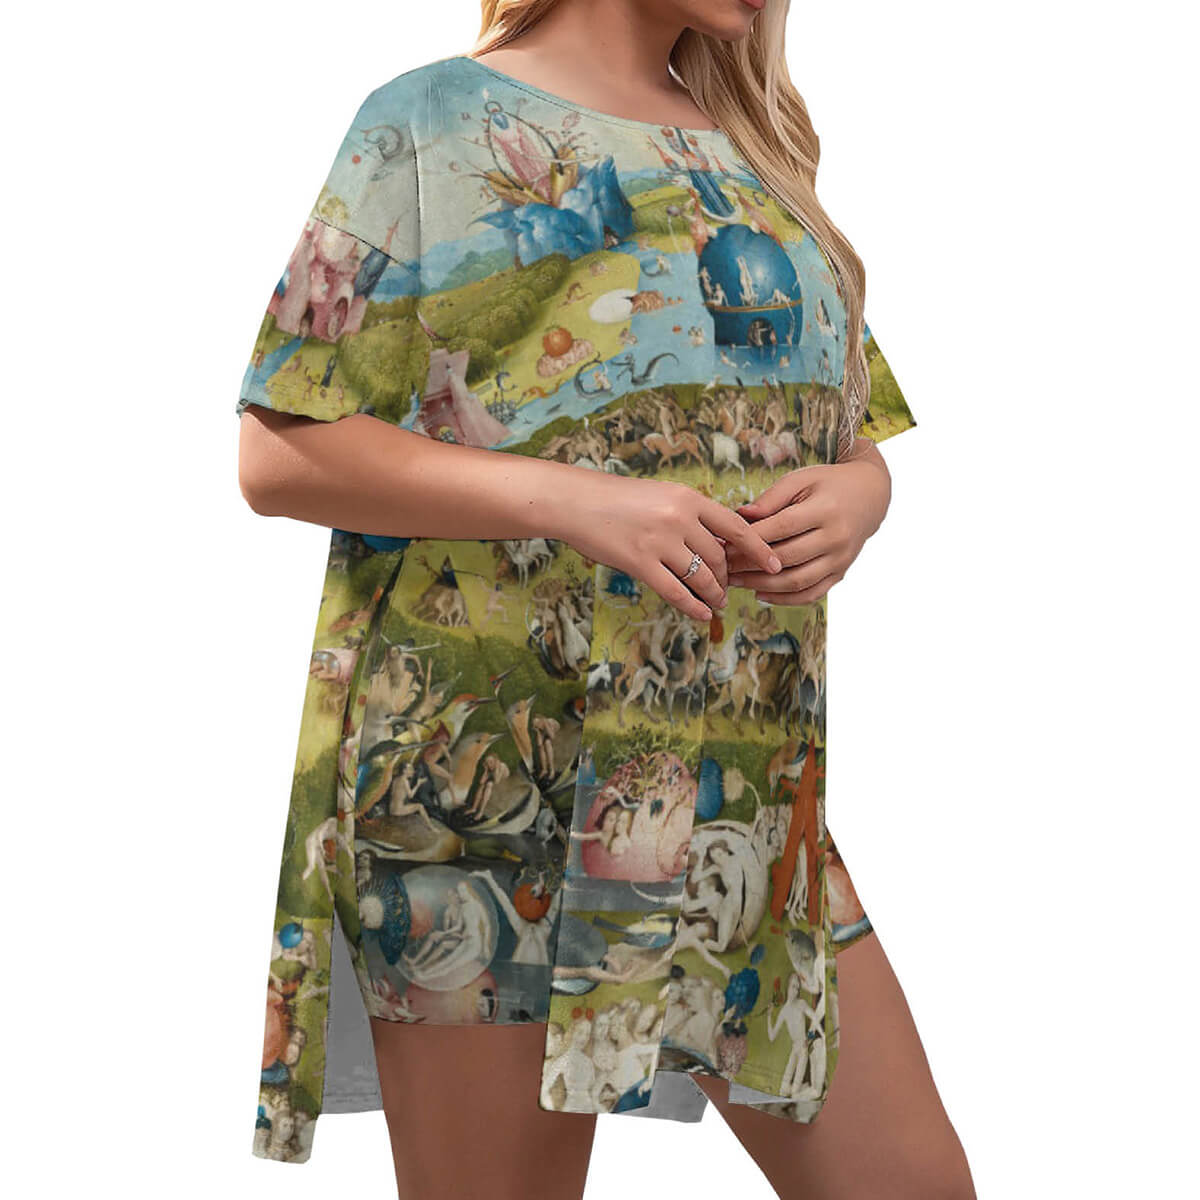 Hieronymus Bosch Earthly Delights T-Shirt and Shorts